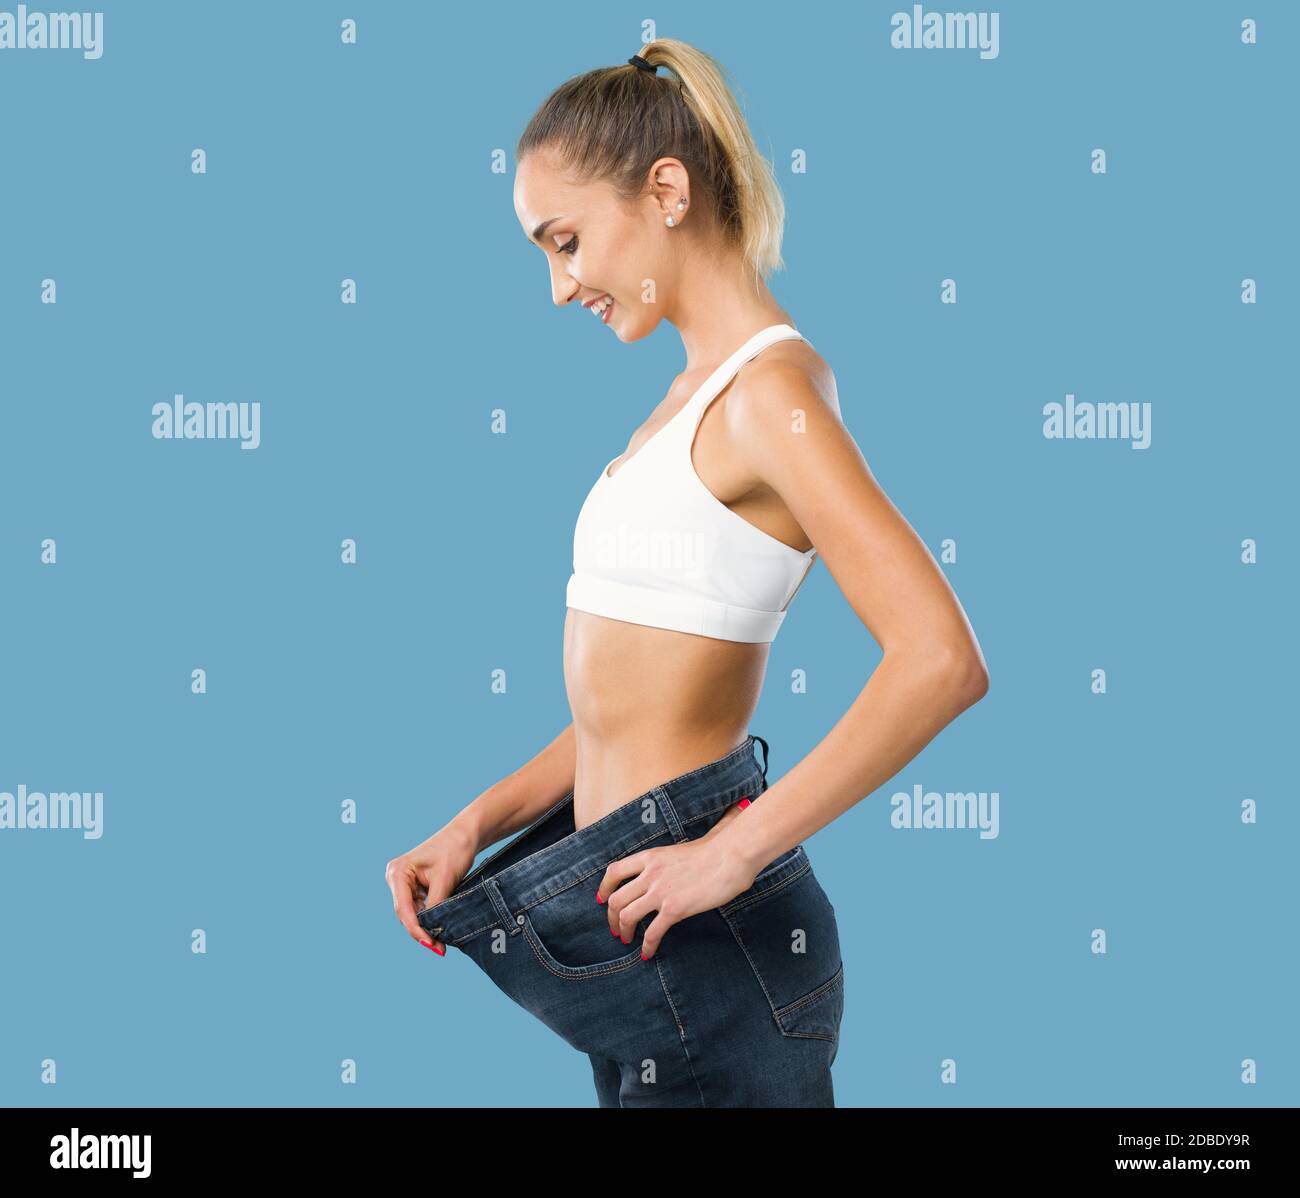 Woman showing her successful weight loss, her jeans are loose and she is slim, weight loss and fitness concept Stock Photo